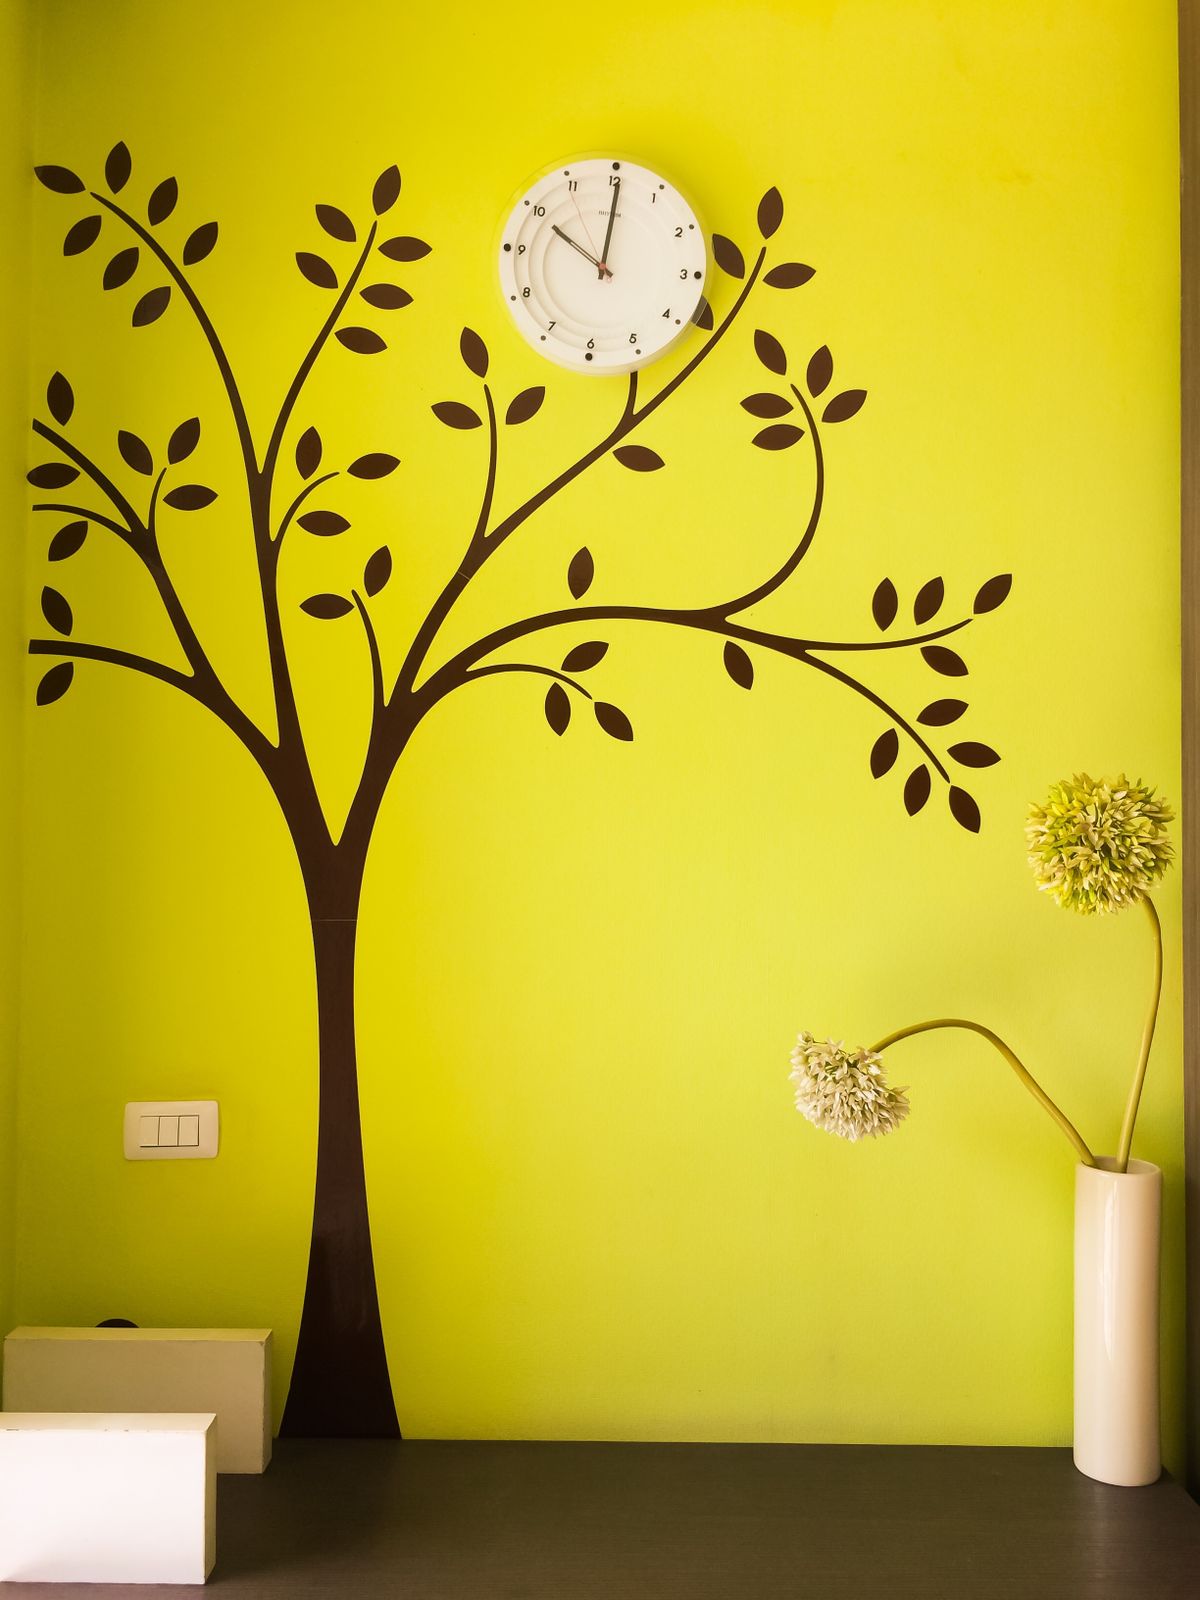 Green,Citron,Color,Wall,With,Black,Tree,Wall,Decal,And